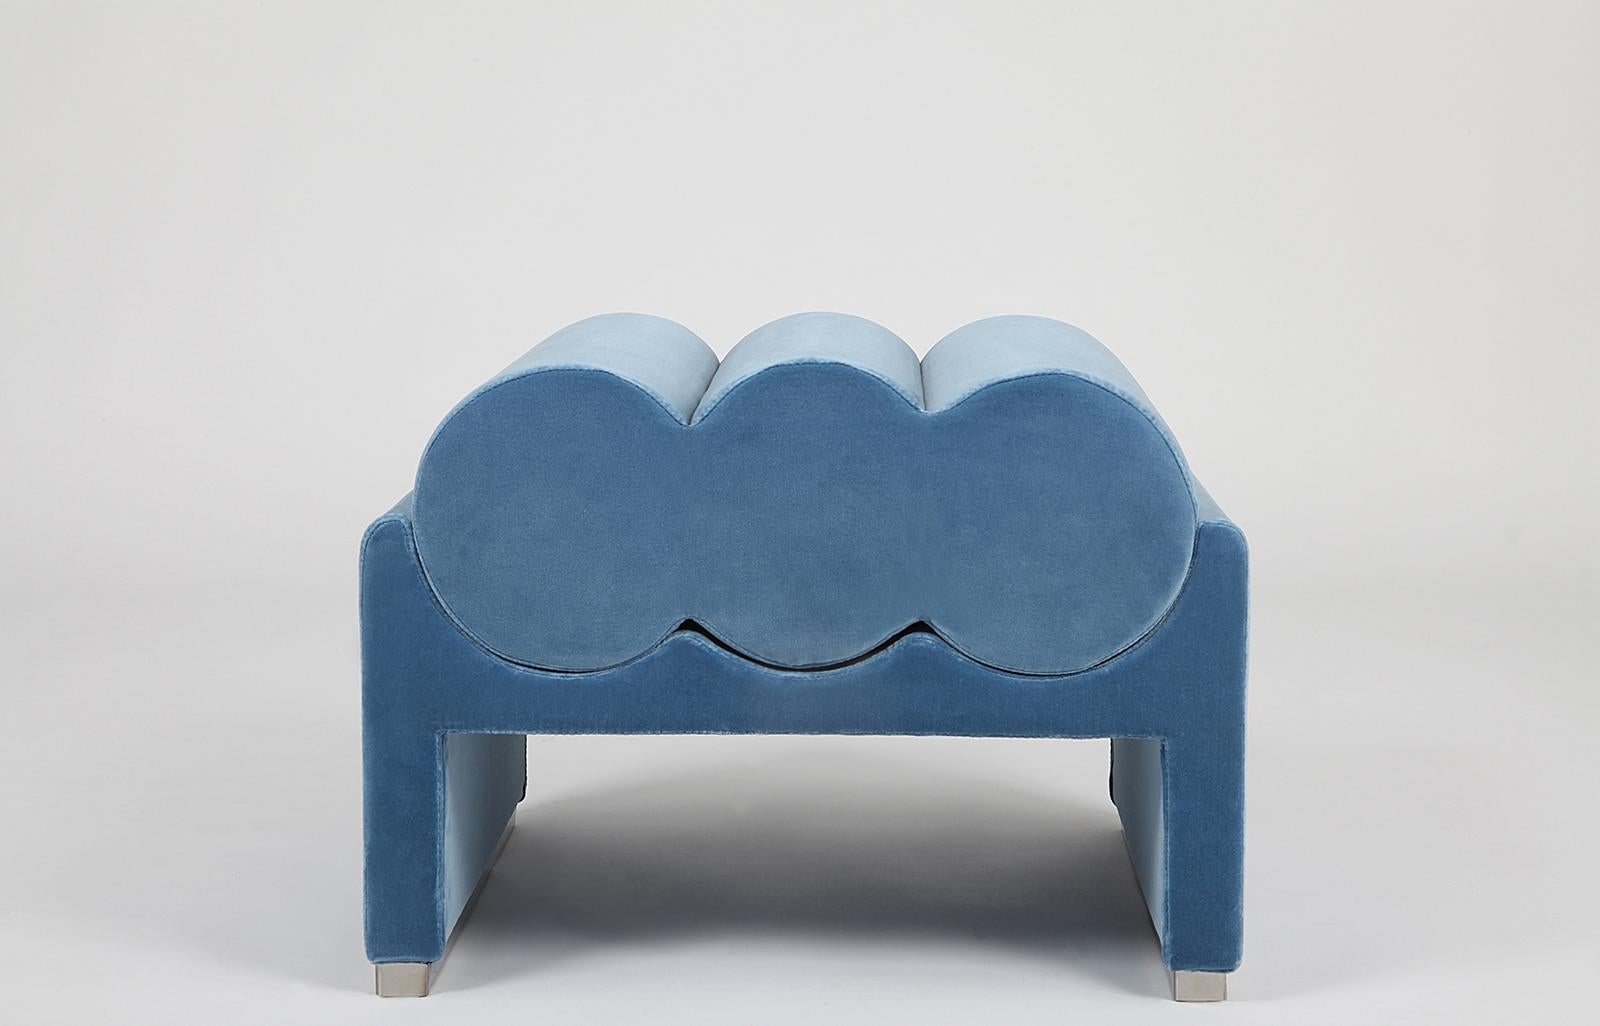 Kyl is a fabric pouf inspired by the lines of the Kylíndo armchair. The modular pouf is versatile; available in a long version, which can be used as a bench, or a short version, which can also be used individually in combination with the Kylindo